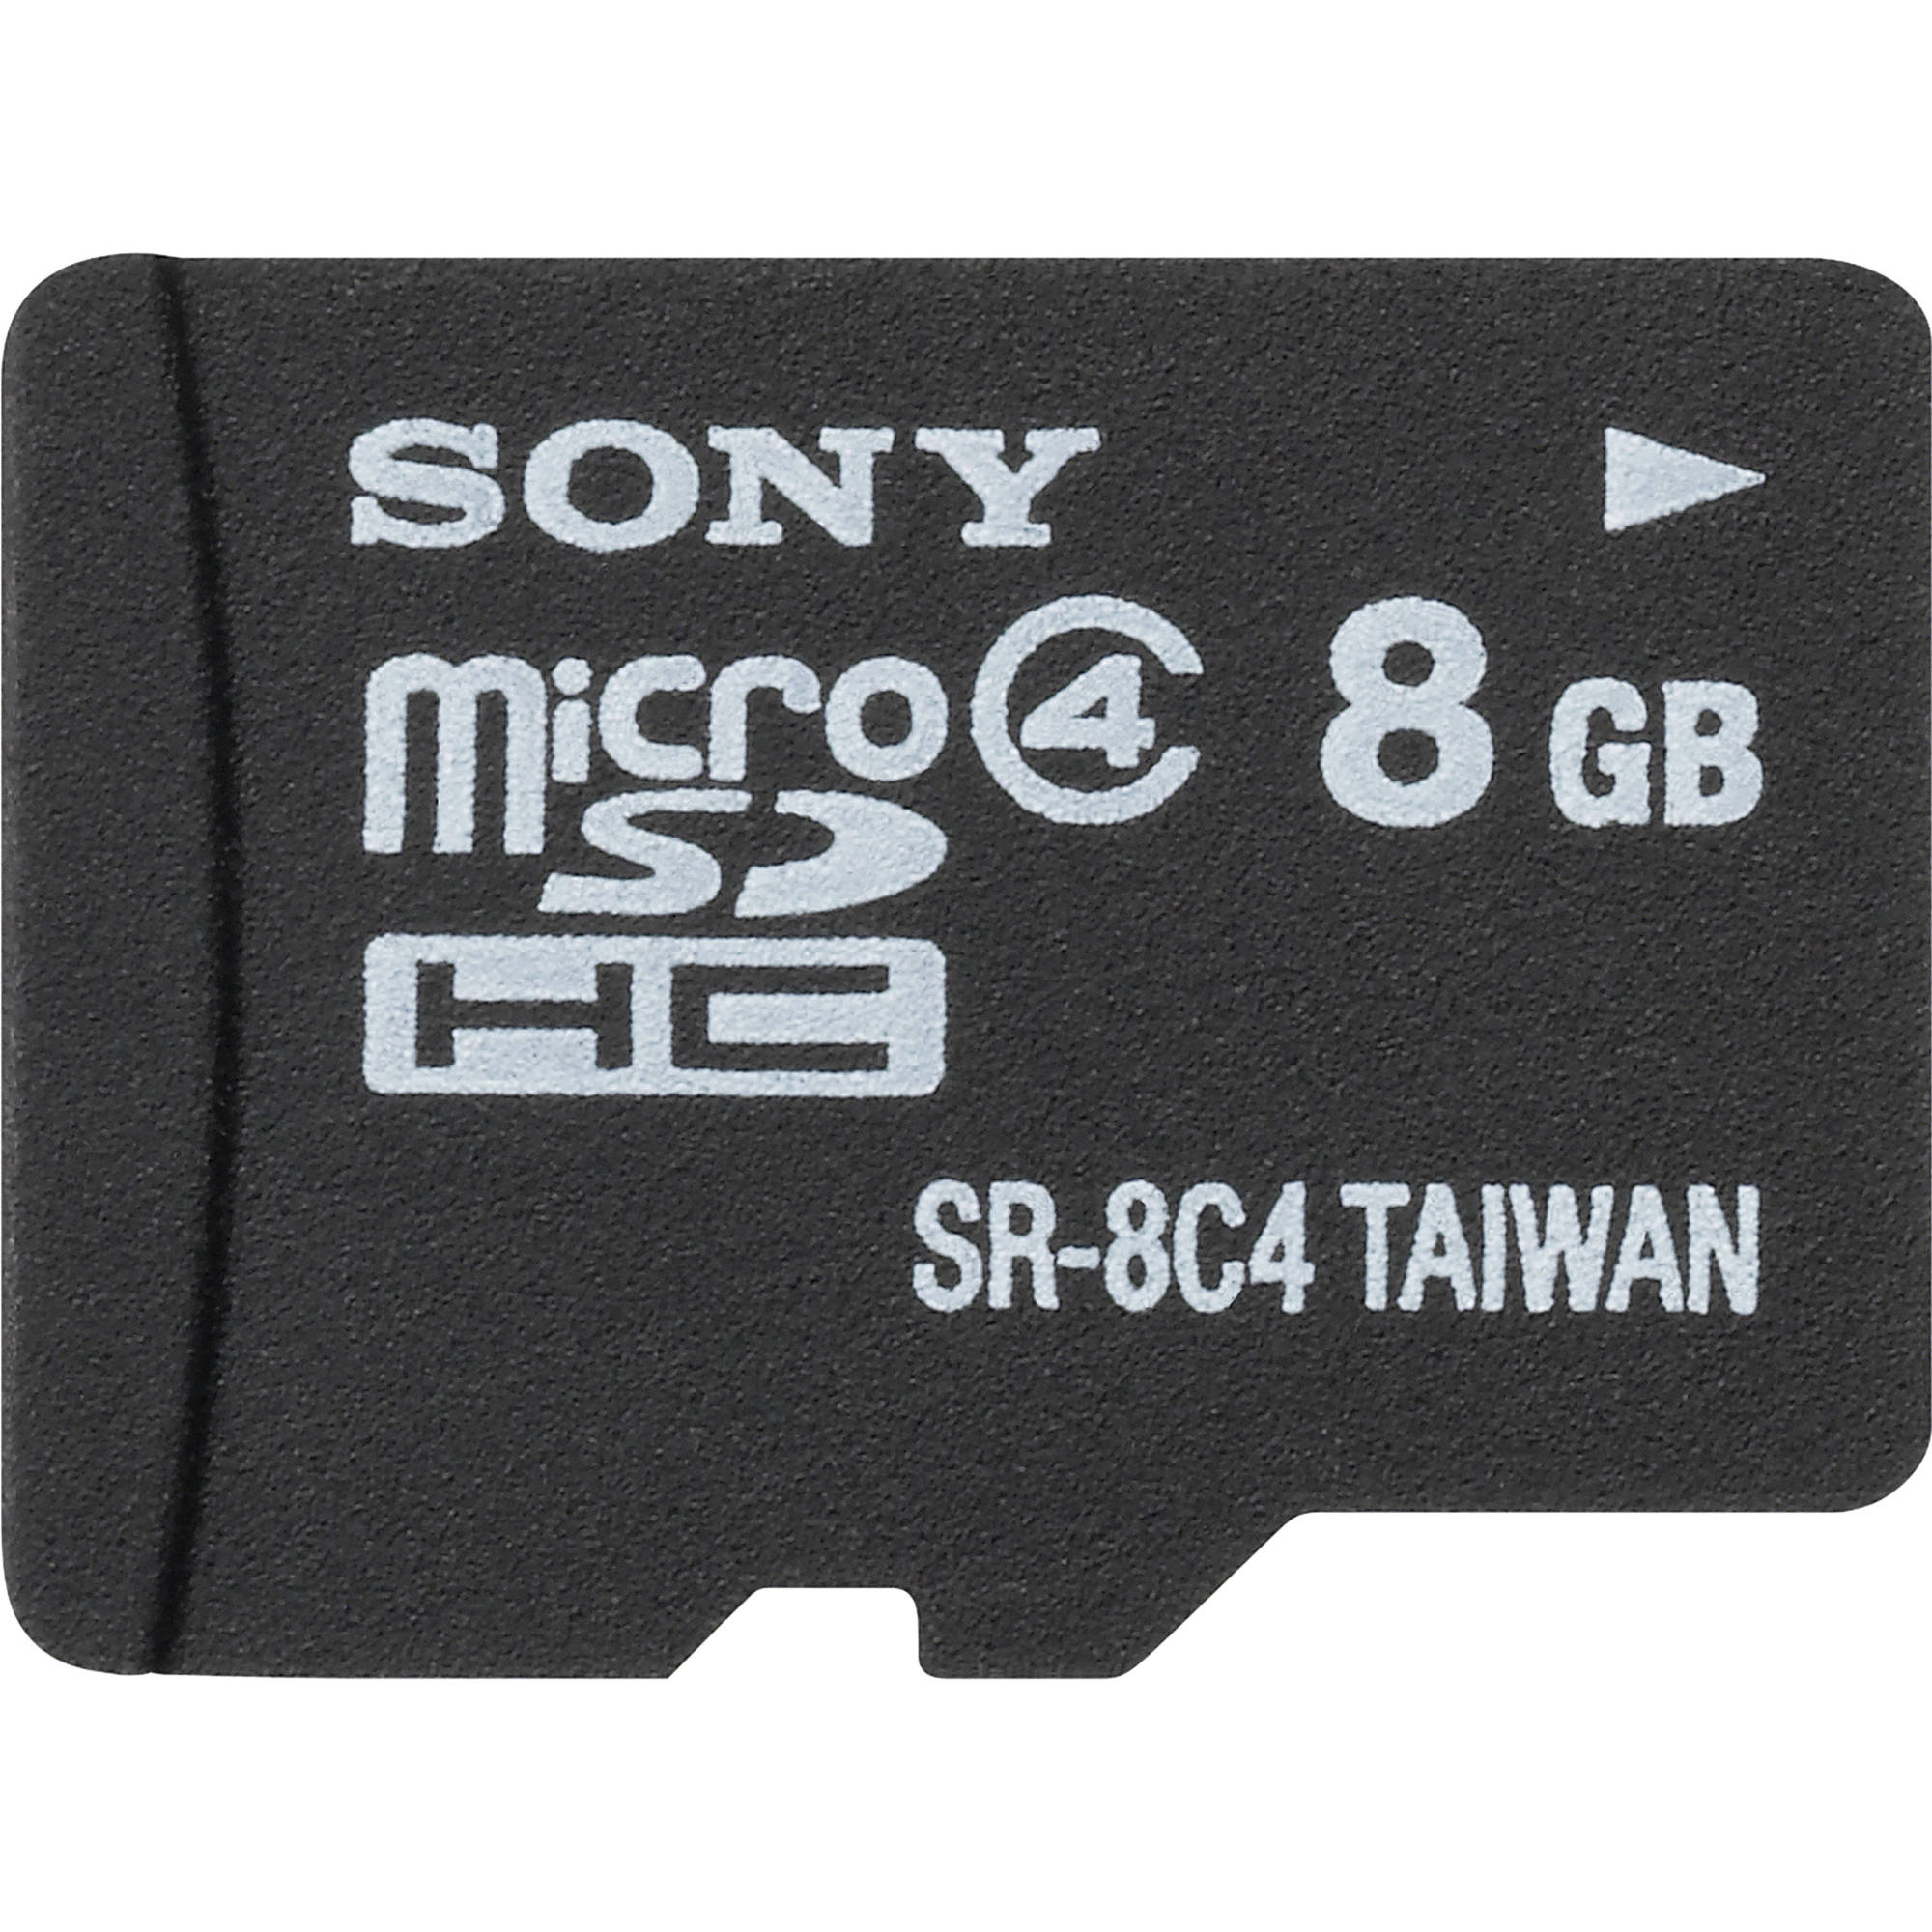 Sony 8GB microSDHC Memory Card Class 4 with microSD Adapter (4MB/s)